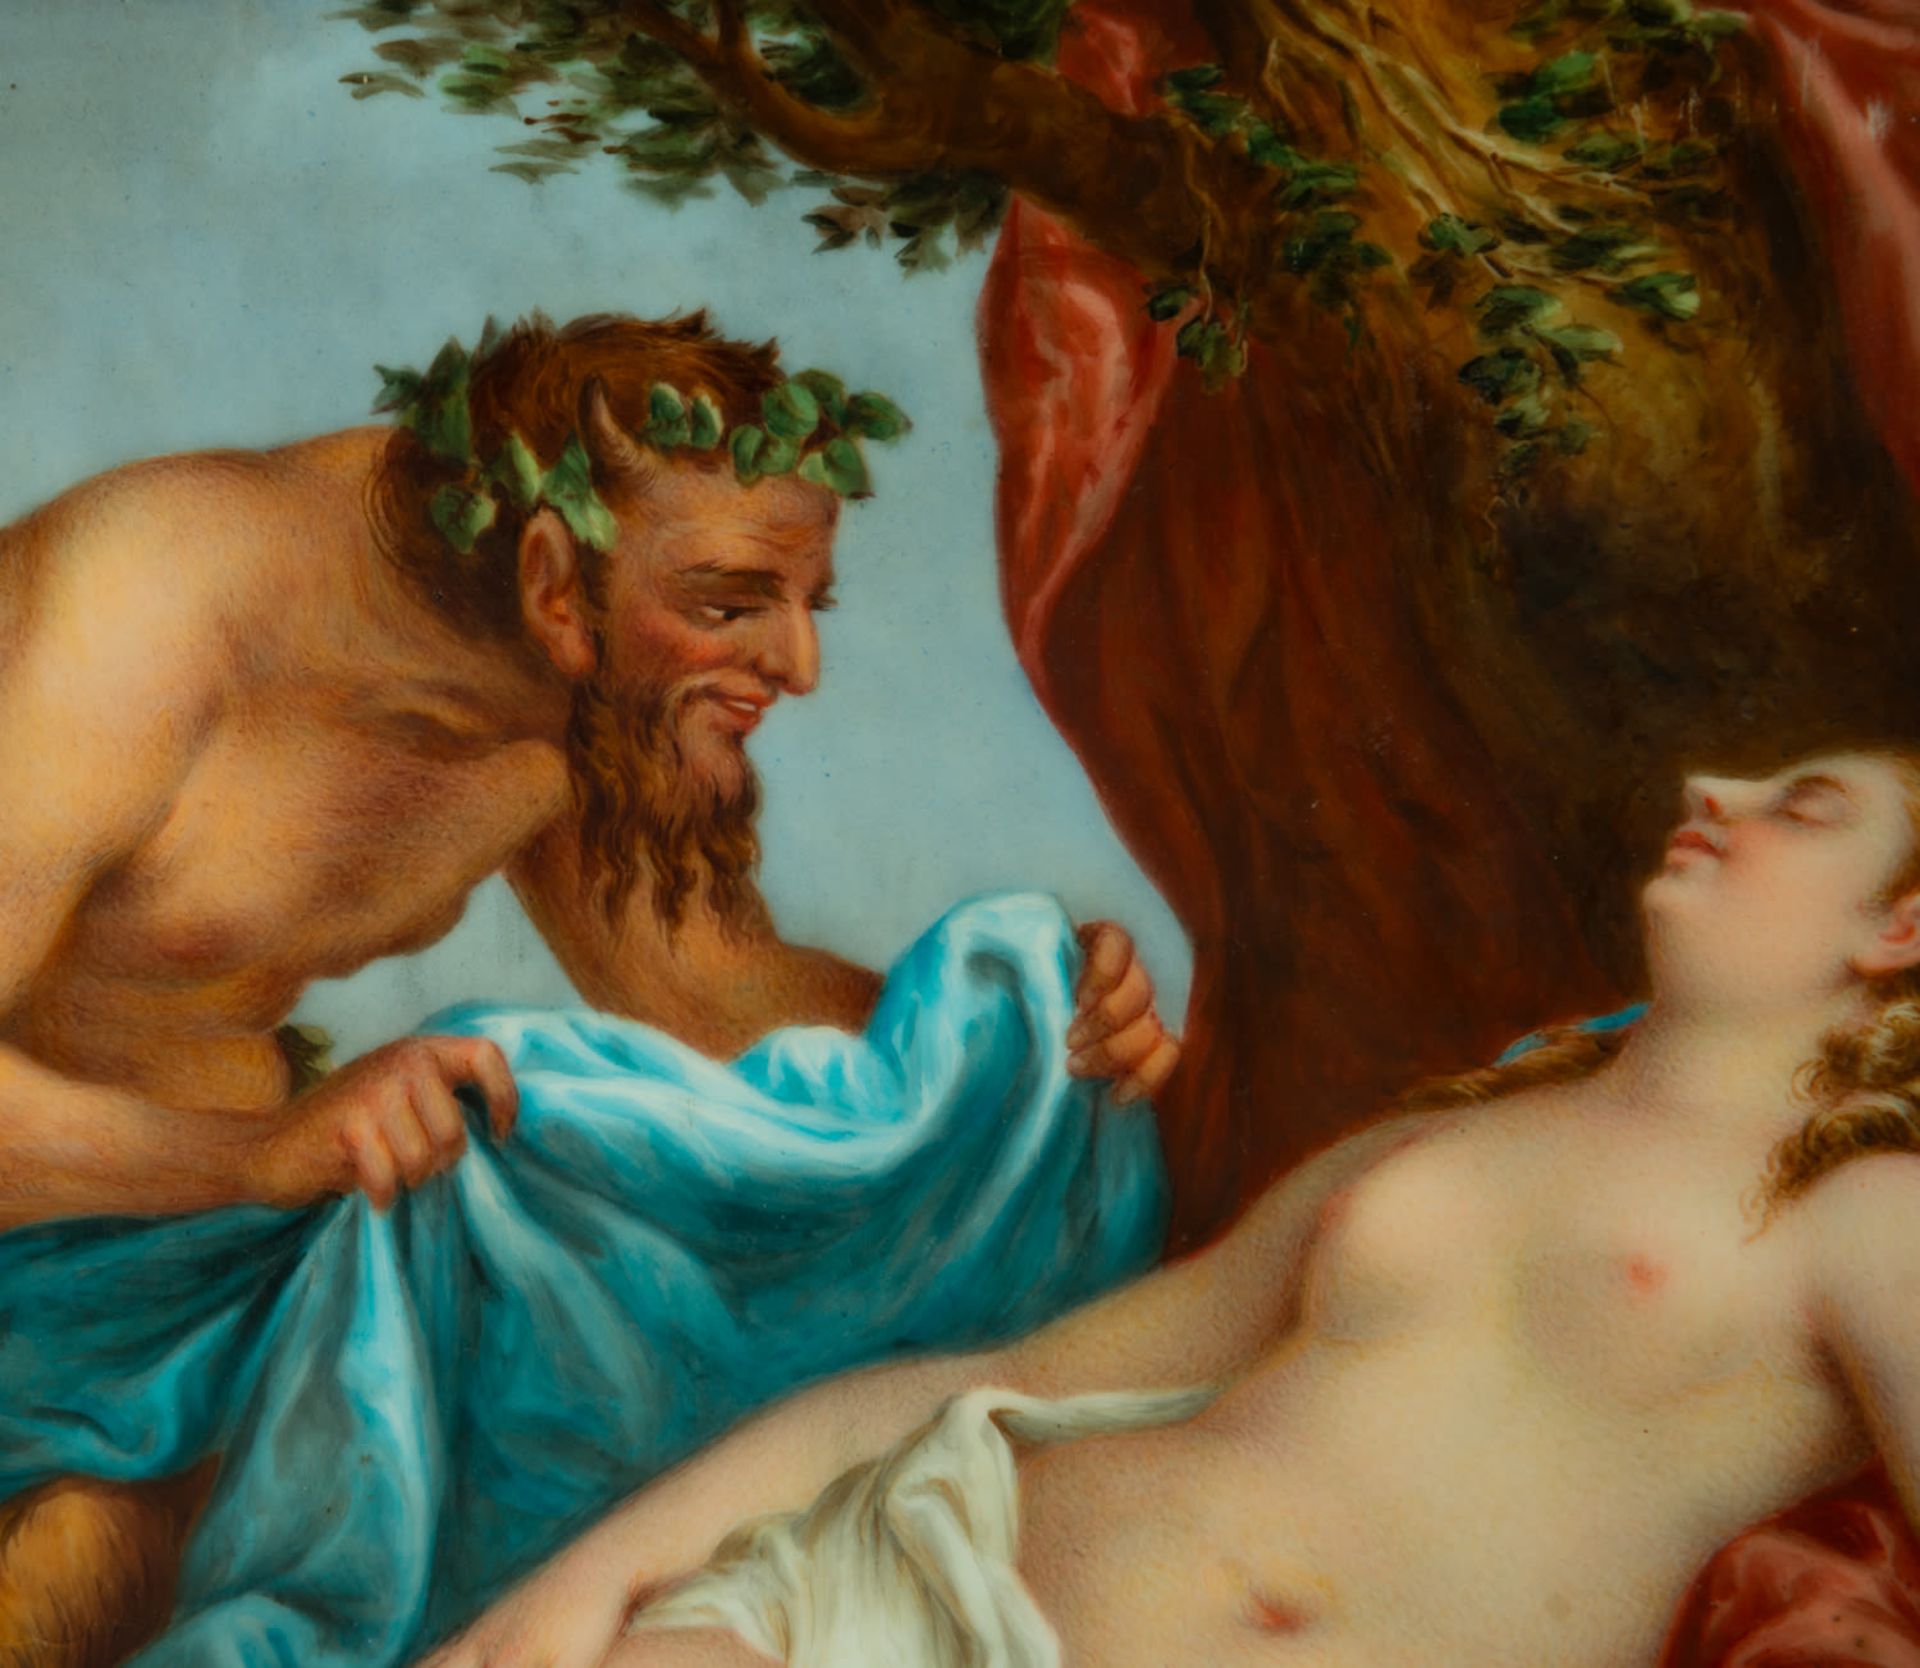 Faun Next to Venus - Hand-enamelled and signed Porcelain Plate, Royal KPMG, 19th century - Image 2 of 8